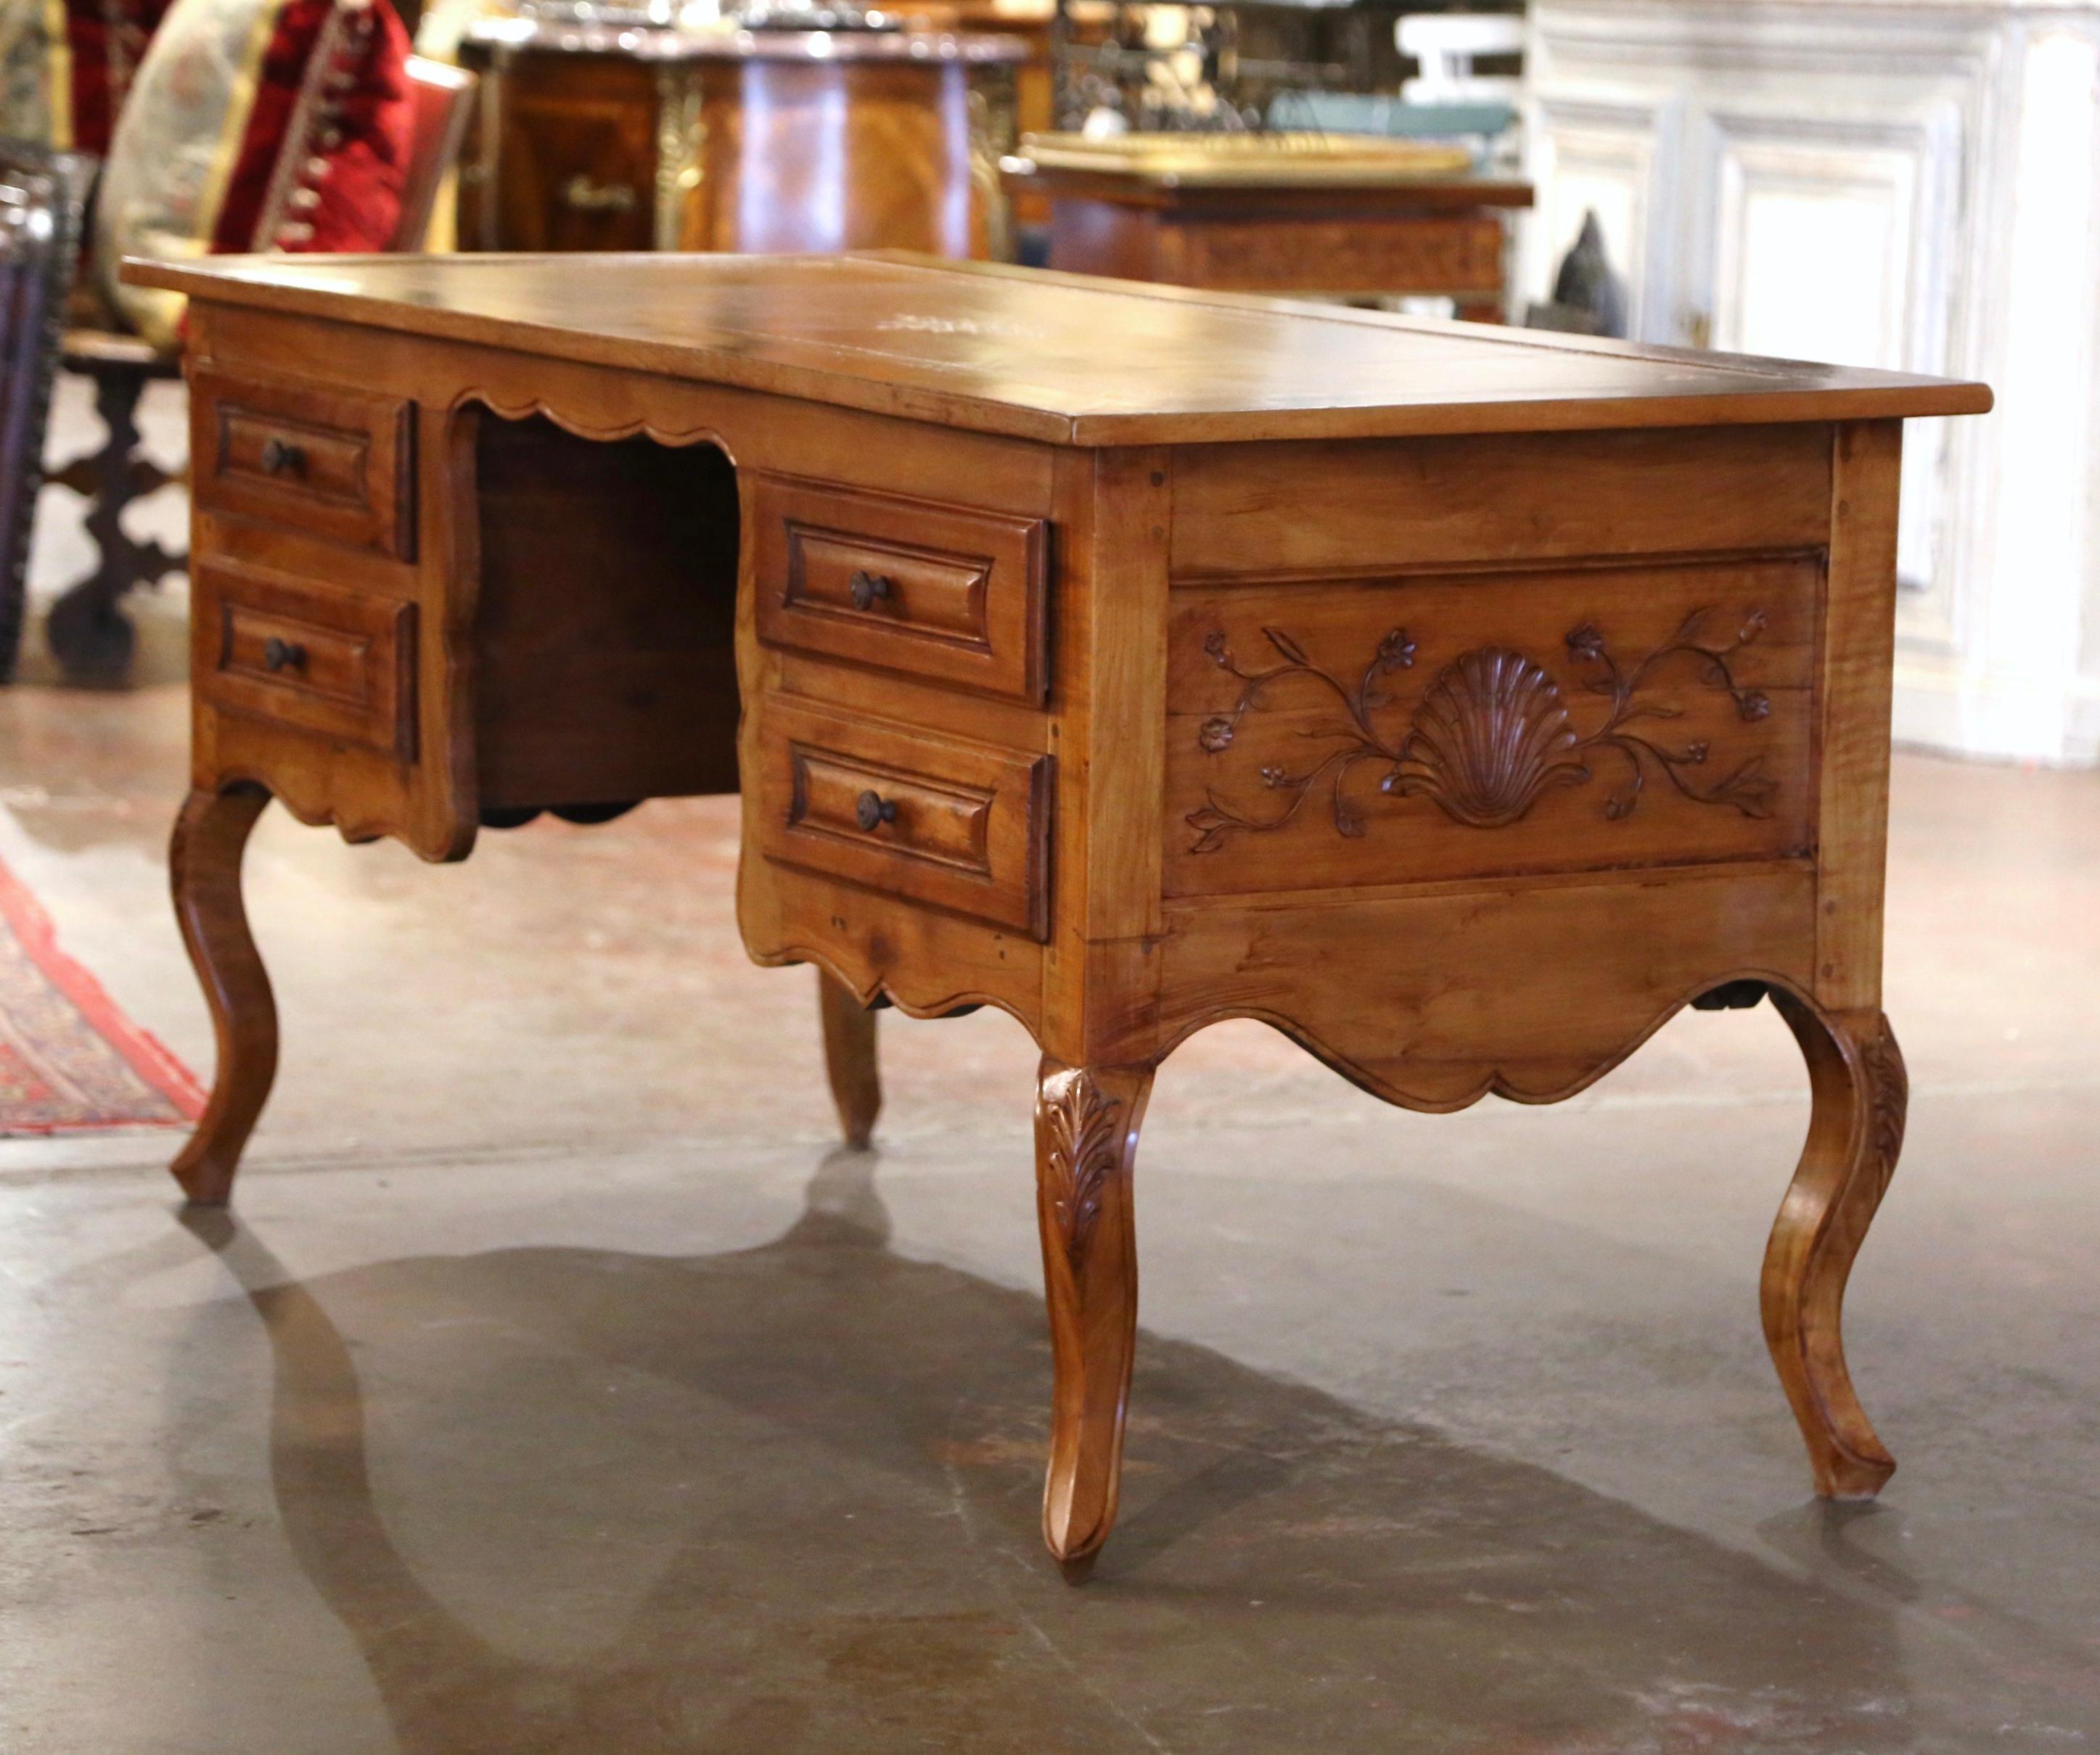 19th Century French Louis XV Carved Cherry Desk with Tan Leather Top For Sale 6